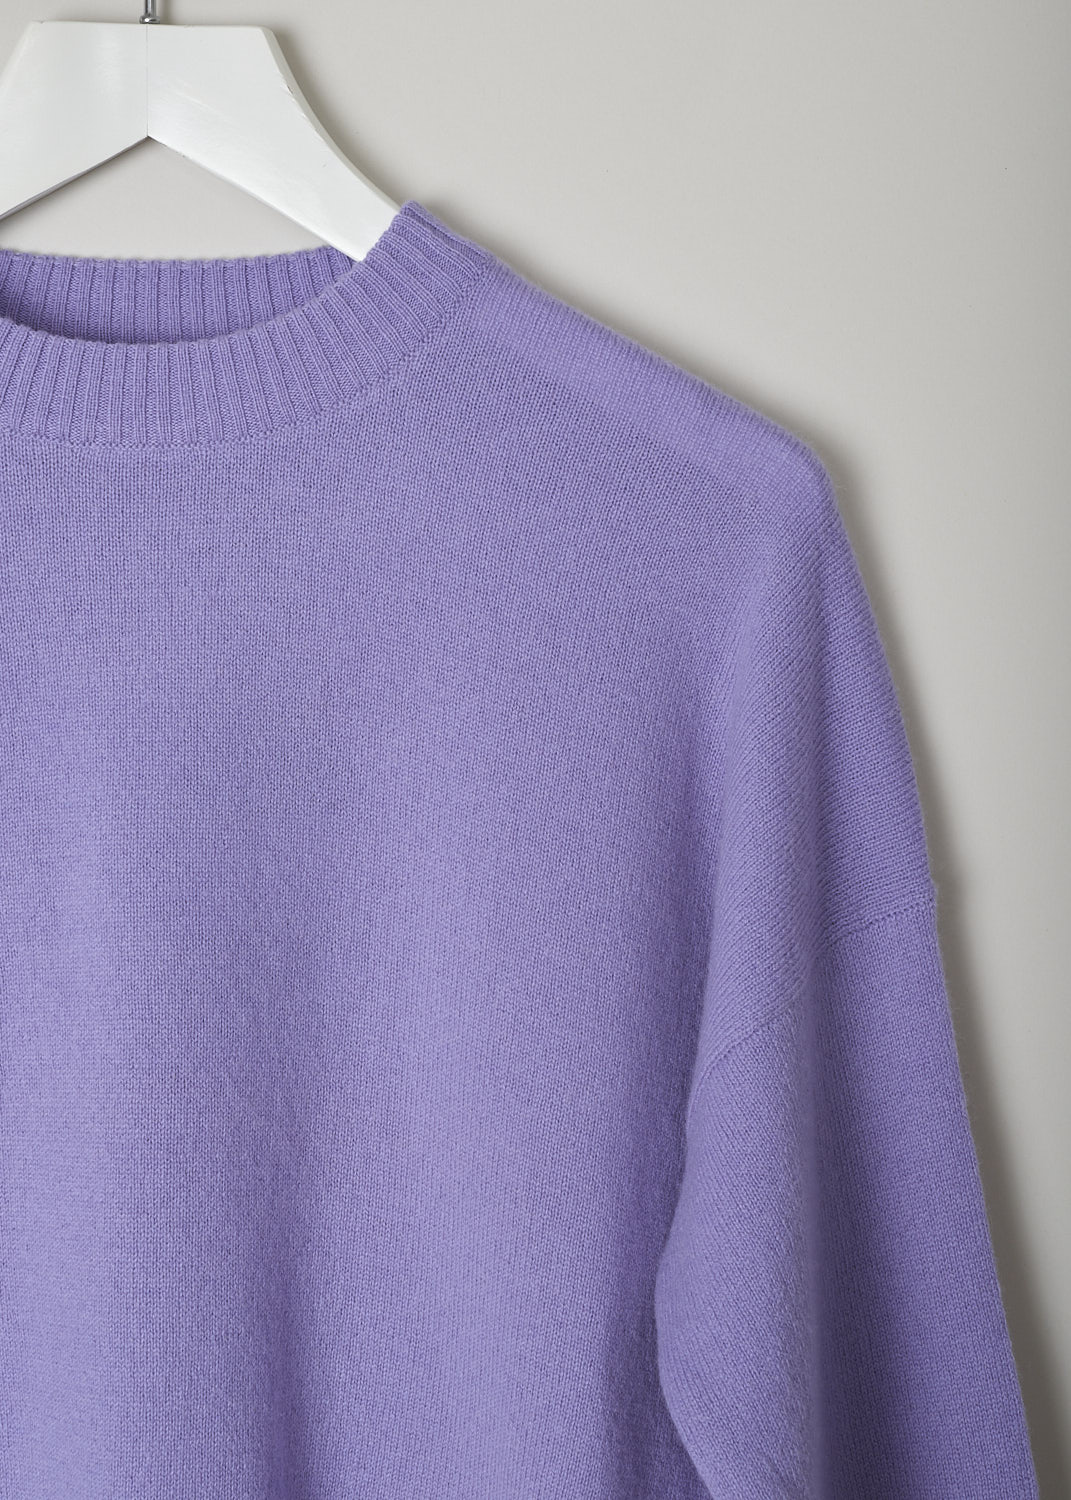 PRINGLE OF SCOTLAND, LAVENDER CASHMERE SWEATER, PWF819_2624_LAVENDER, Purple, Detail, This lavender cashmere sweater had a ribbed round neckline. The cuffs and hemline have that same ribbed finish.  
